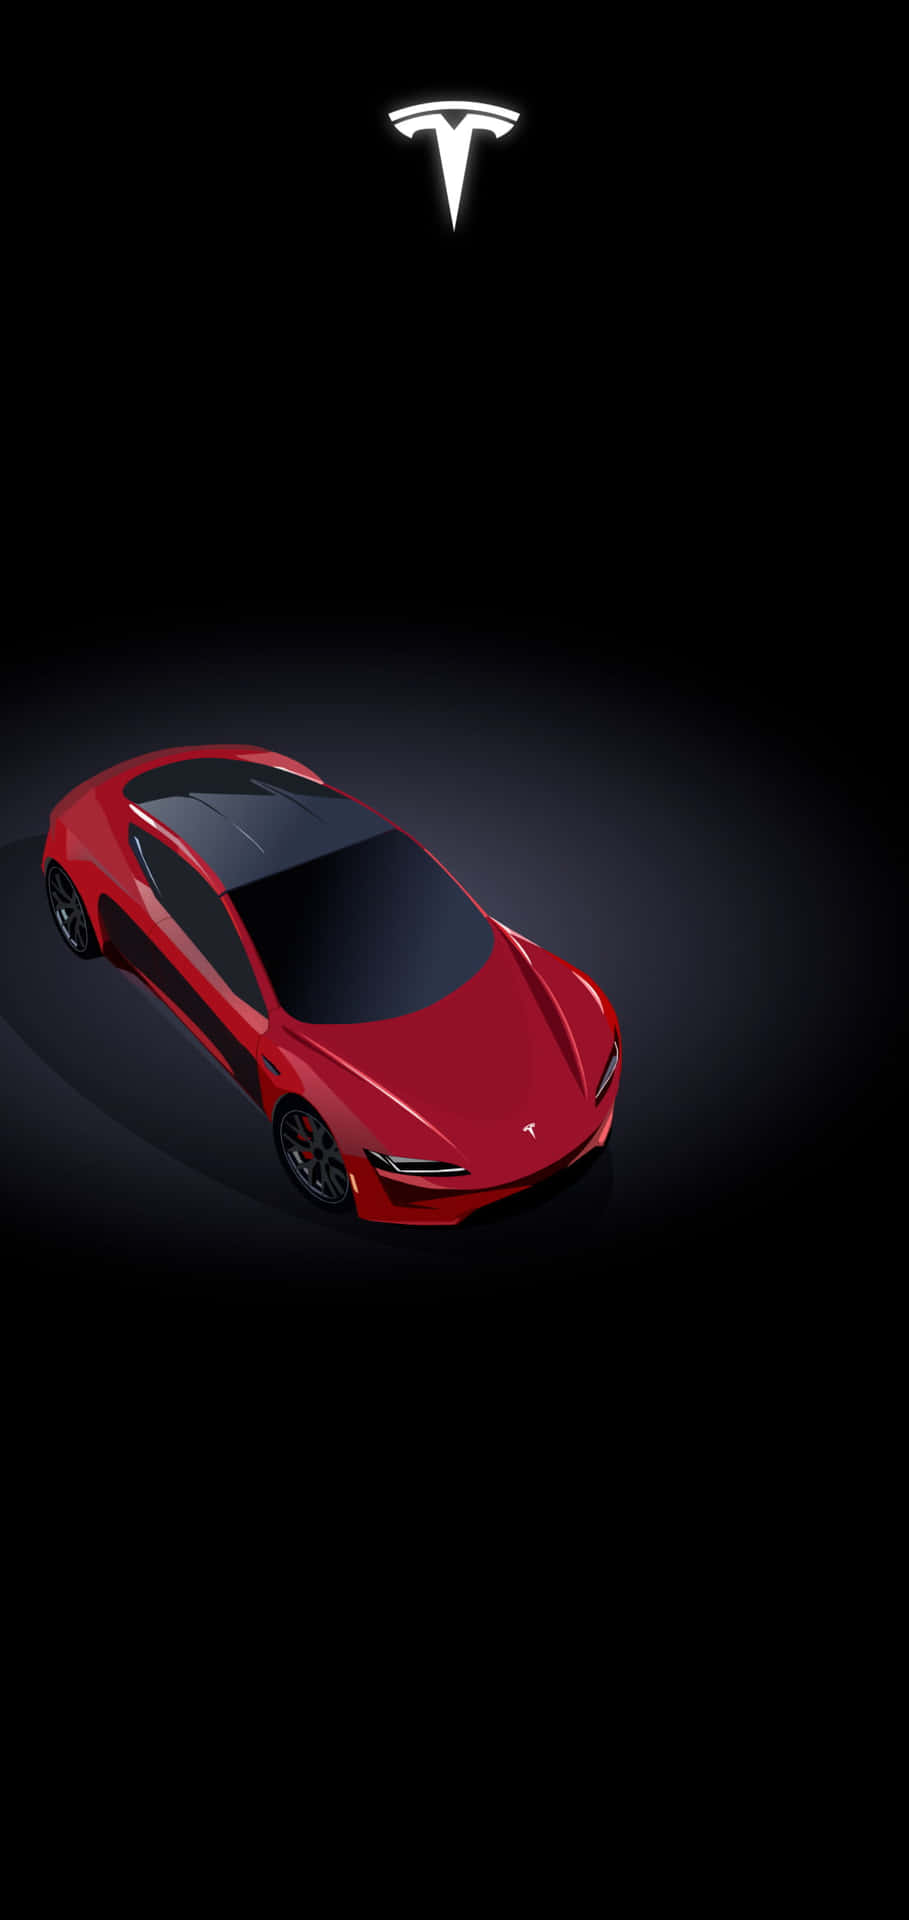 Experience the power of mobile technology with Tesla's new iPhone Wallpaper